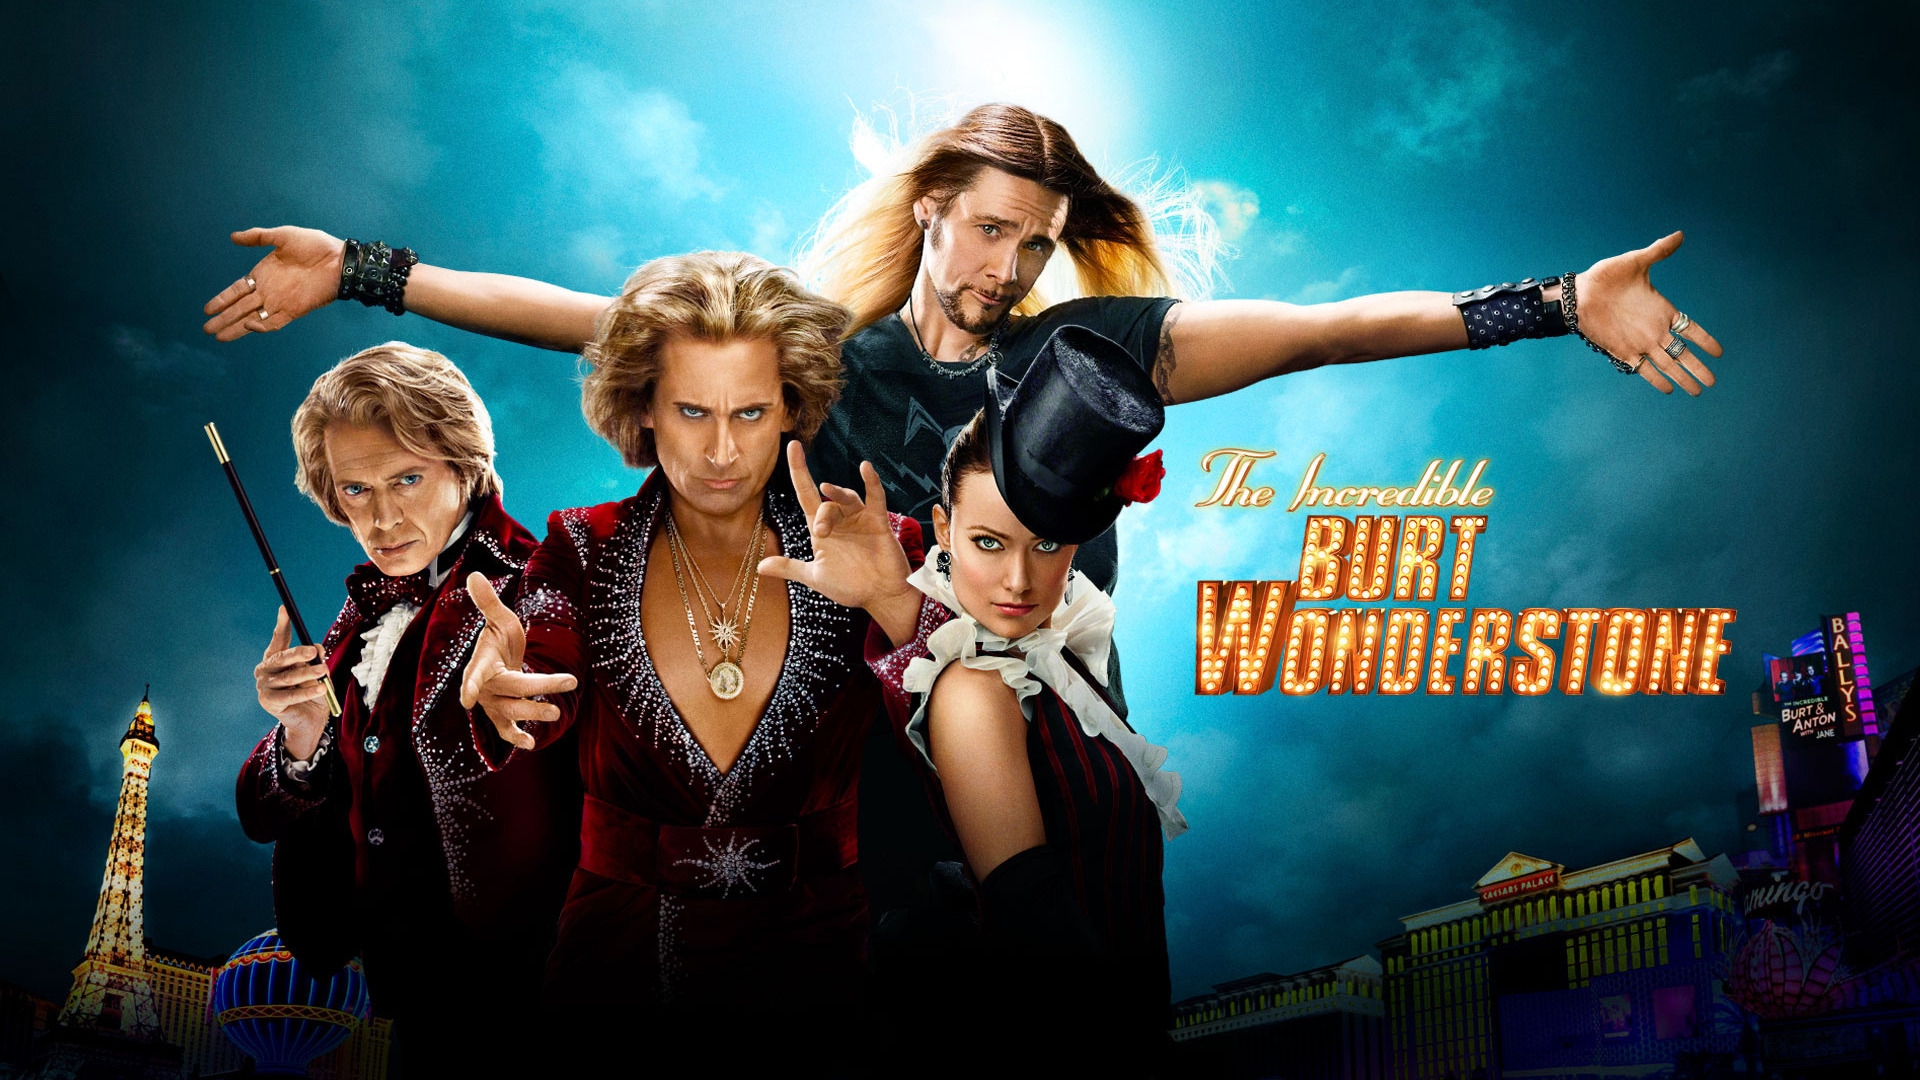 2013 The Incredible Burt Wonderstone Poster for 1920 x 1080 HDTV 1080p resolution